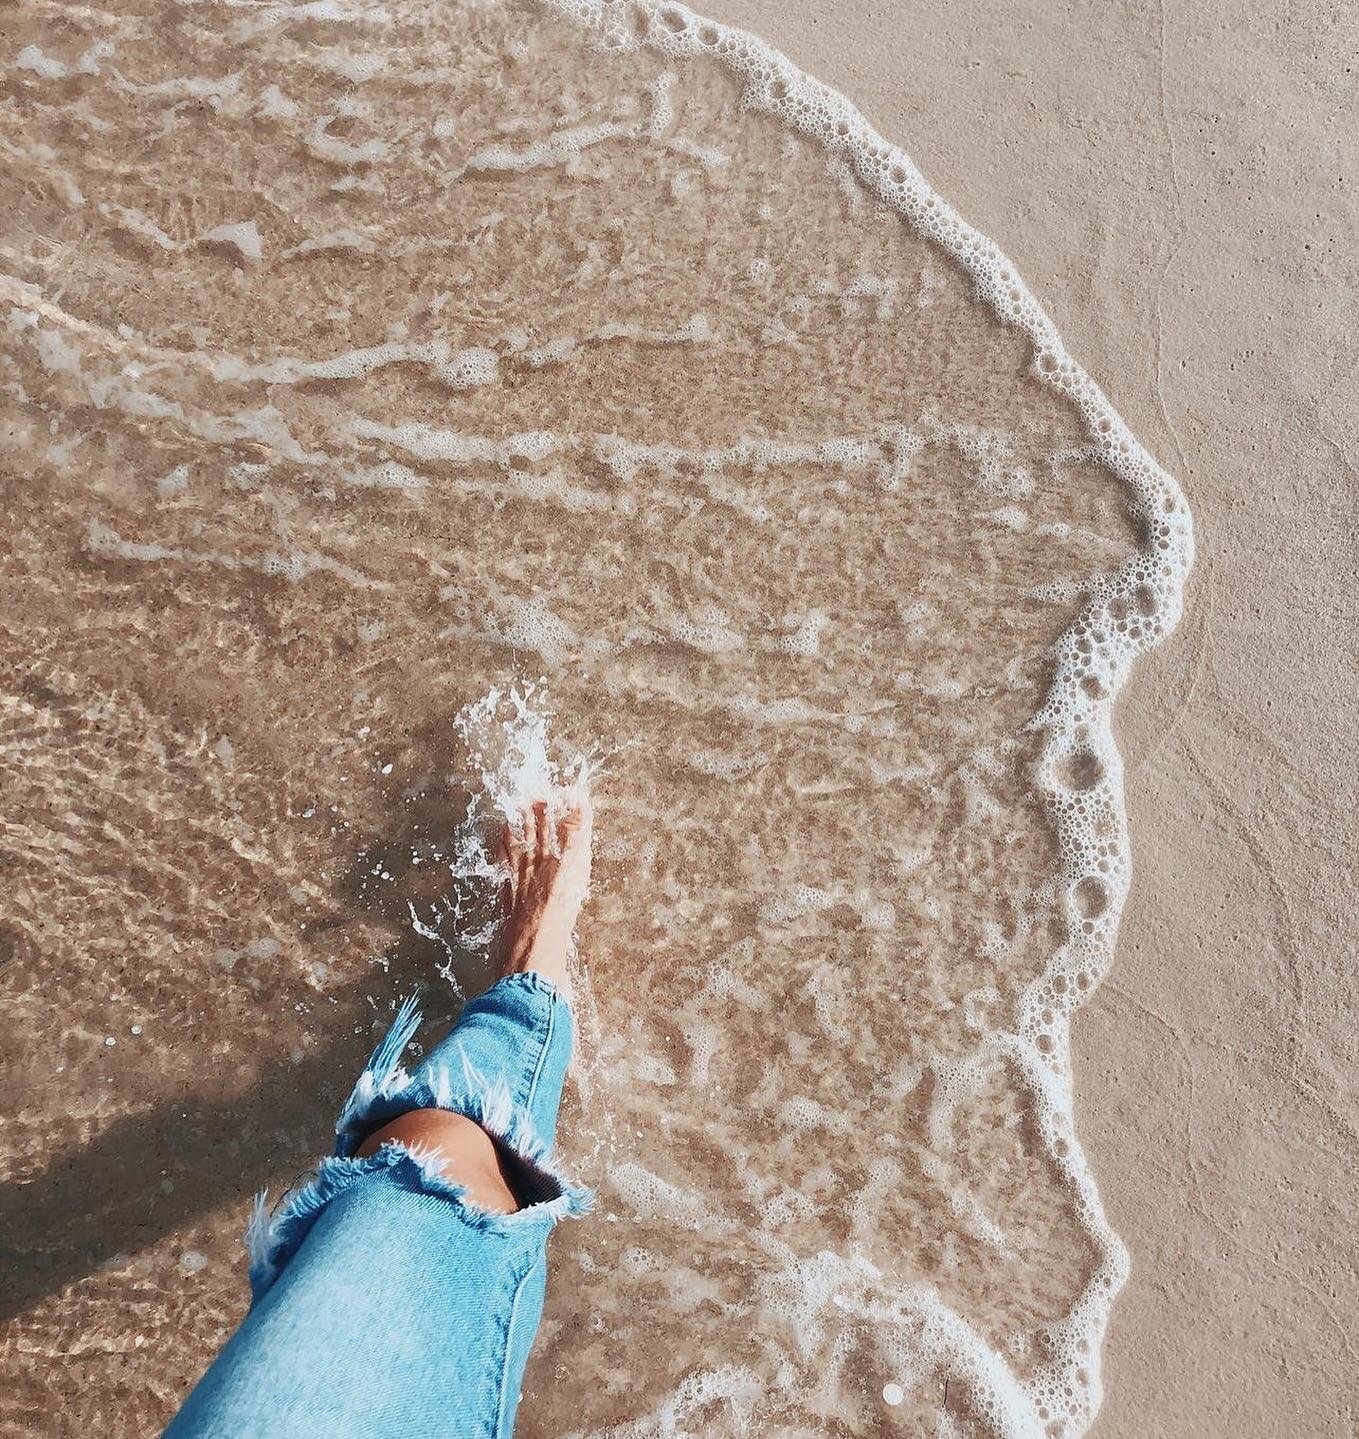 Craving the beach this winter? 🌊

All of our stylists offer styling appointments where you can come have a drink, relax and get your hair shampooed, enjoy a head massage, blowdry, and beach waves all while soaking in the beach vibes at Sandbar! 

Ne